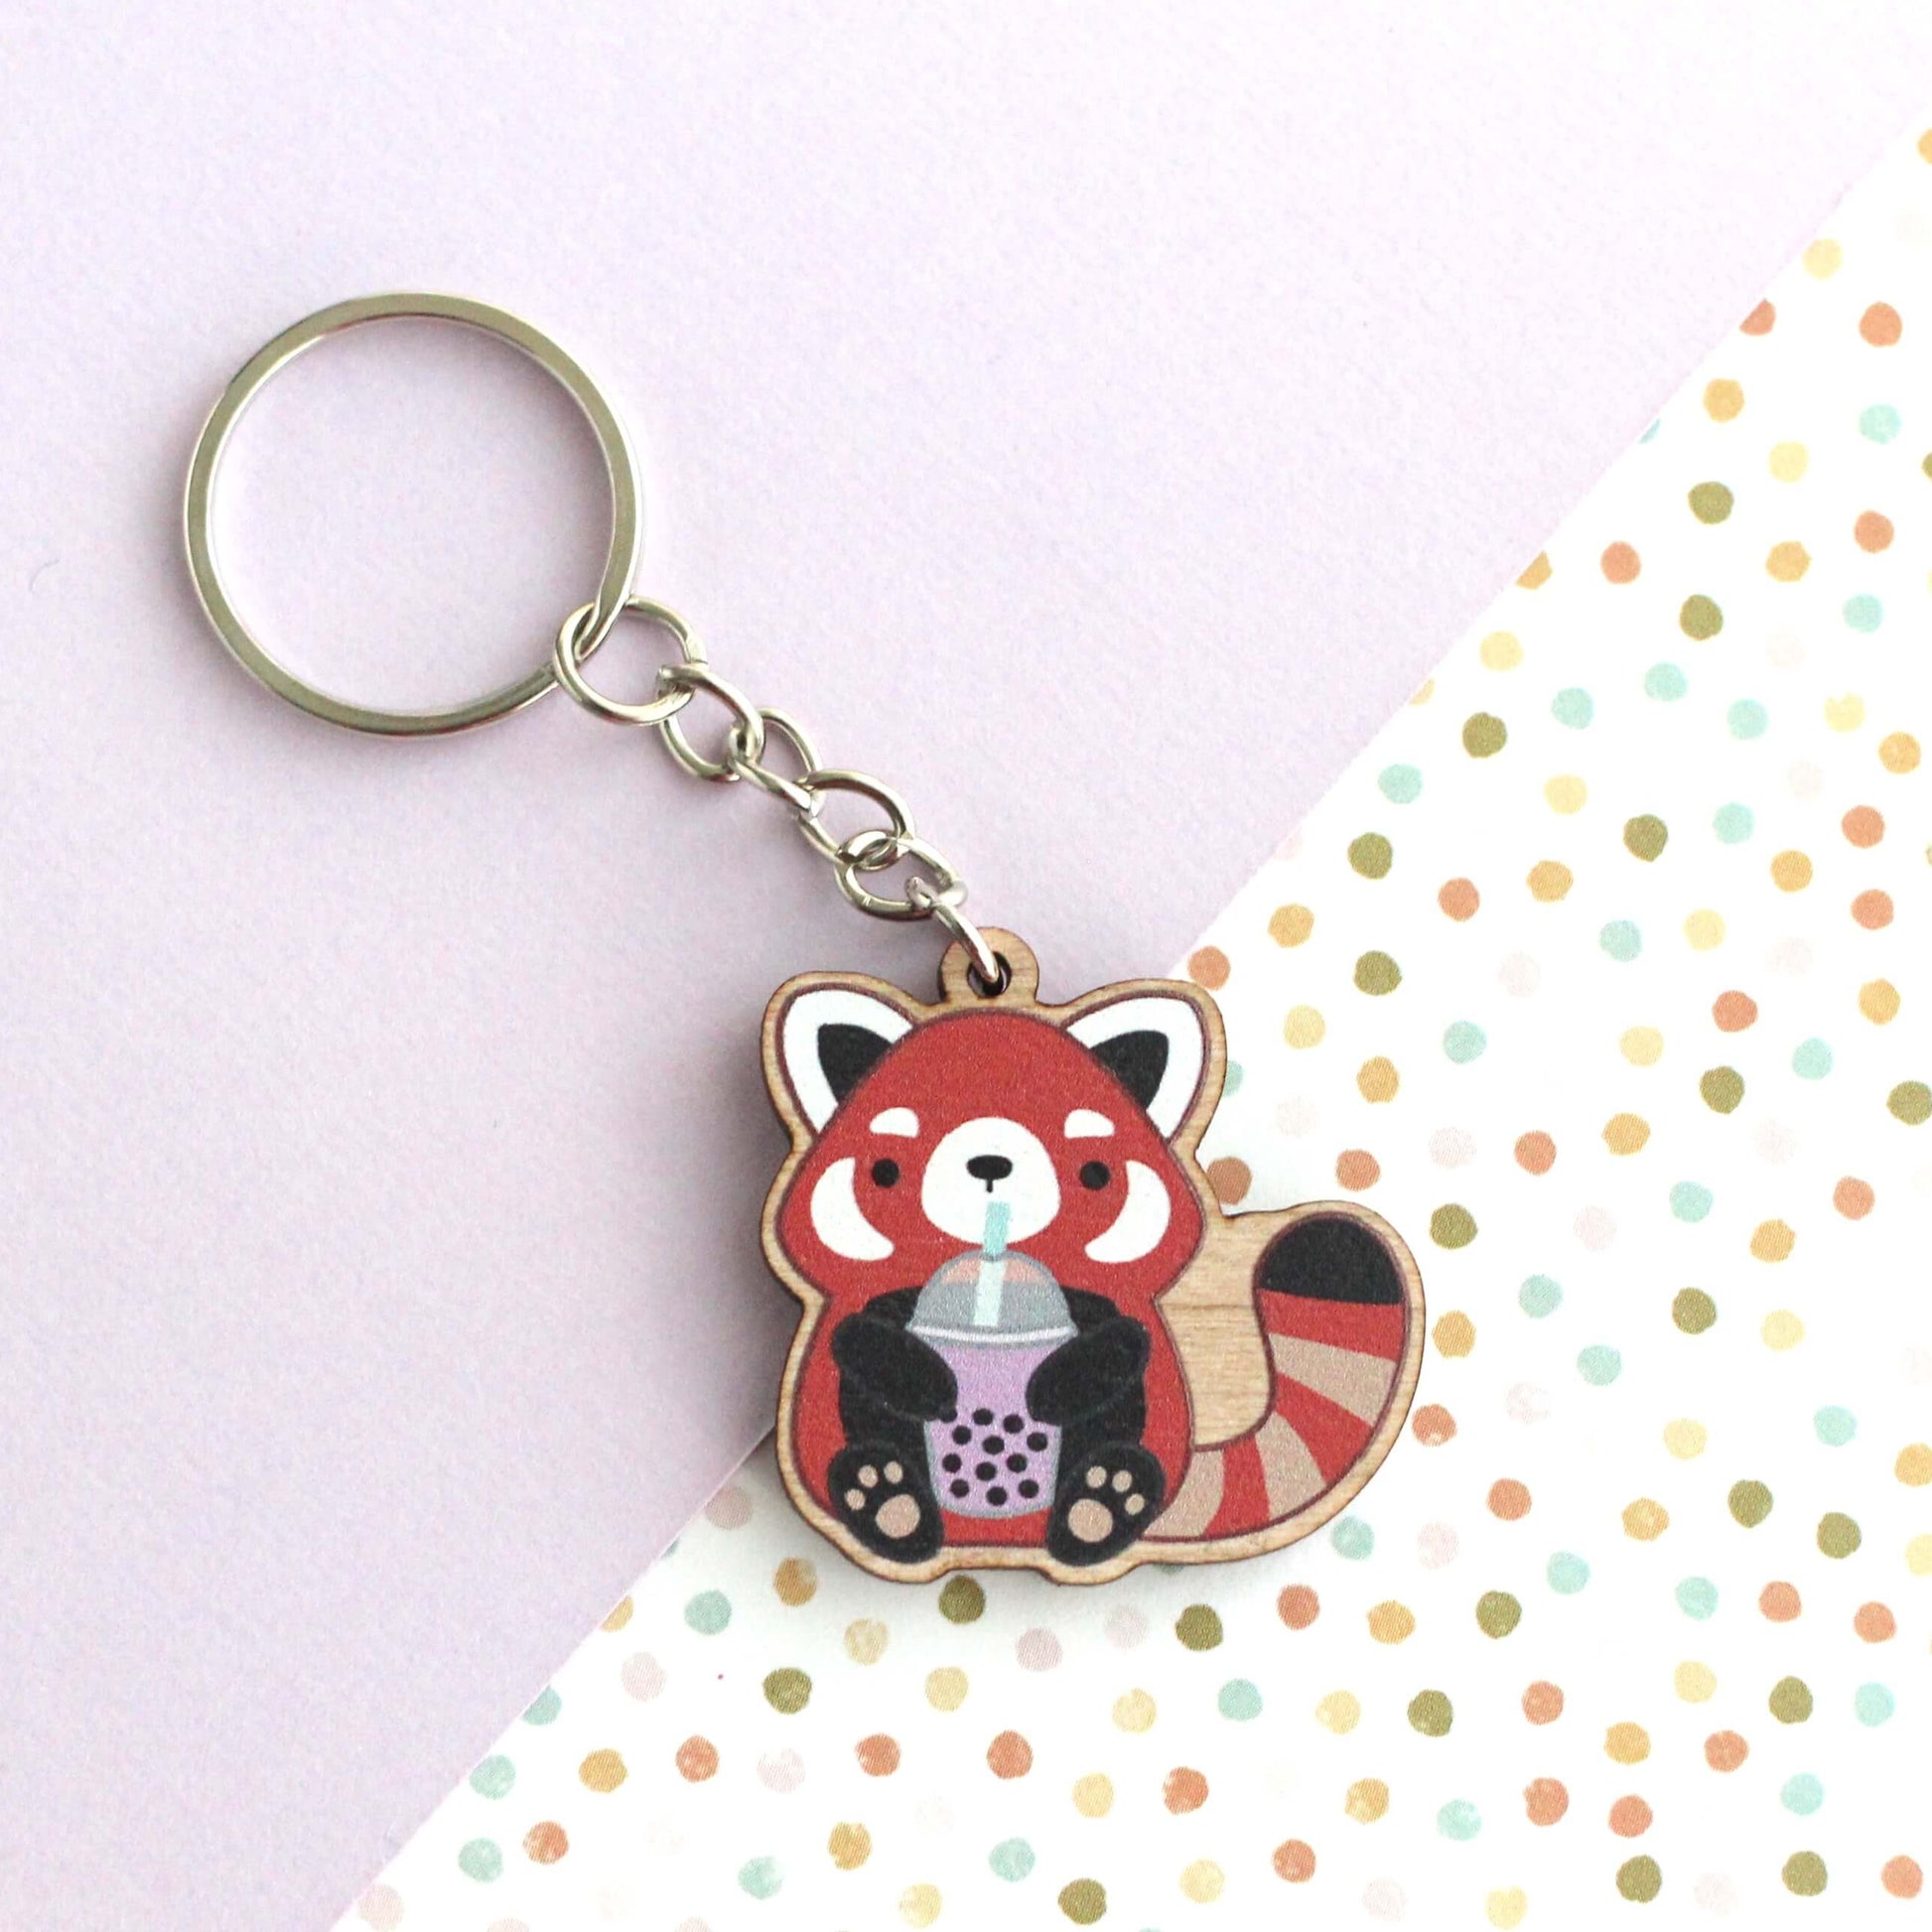 Red Panda holding Bubble Tea Wooden Keychain